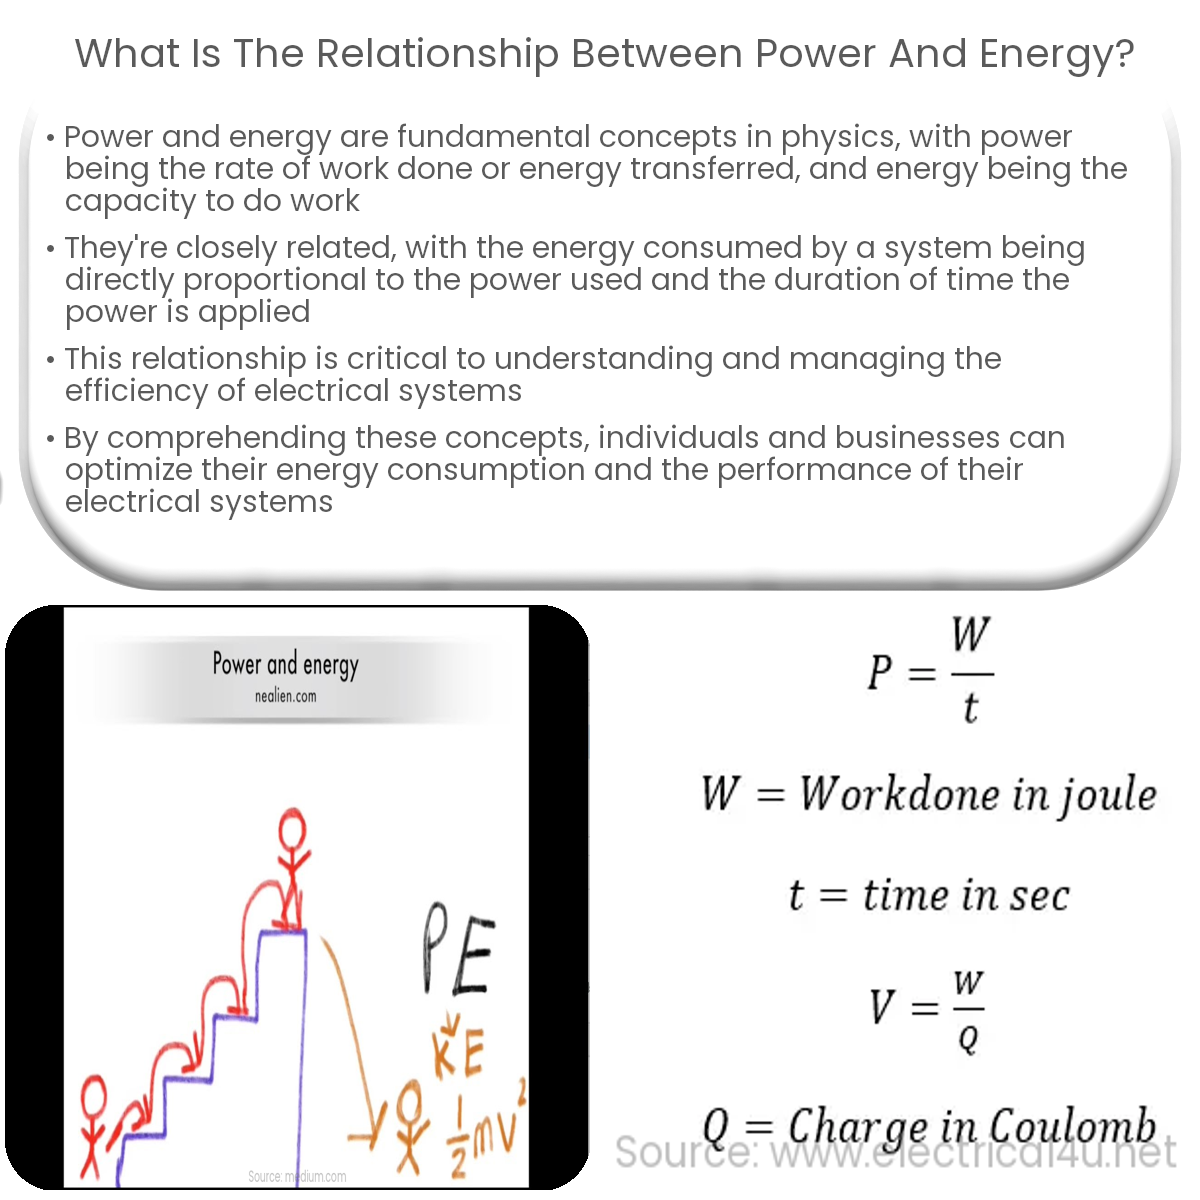 What is the relationship between power and energy?